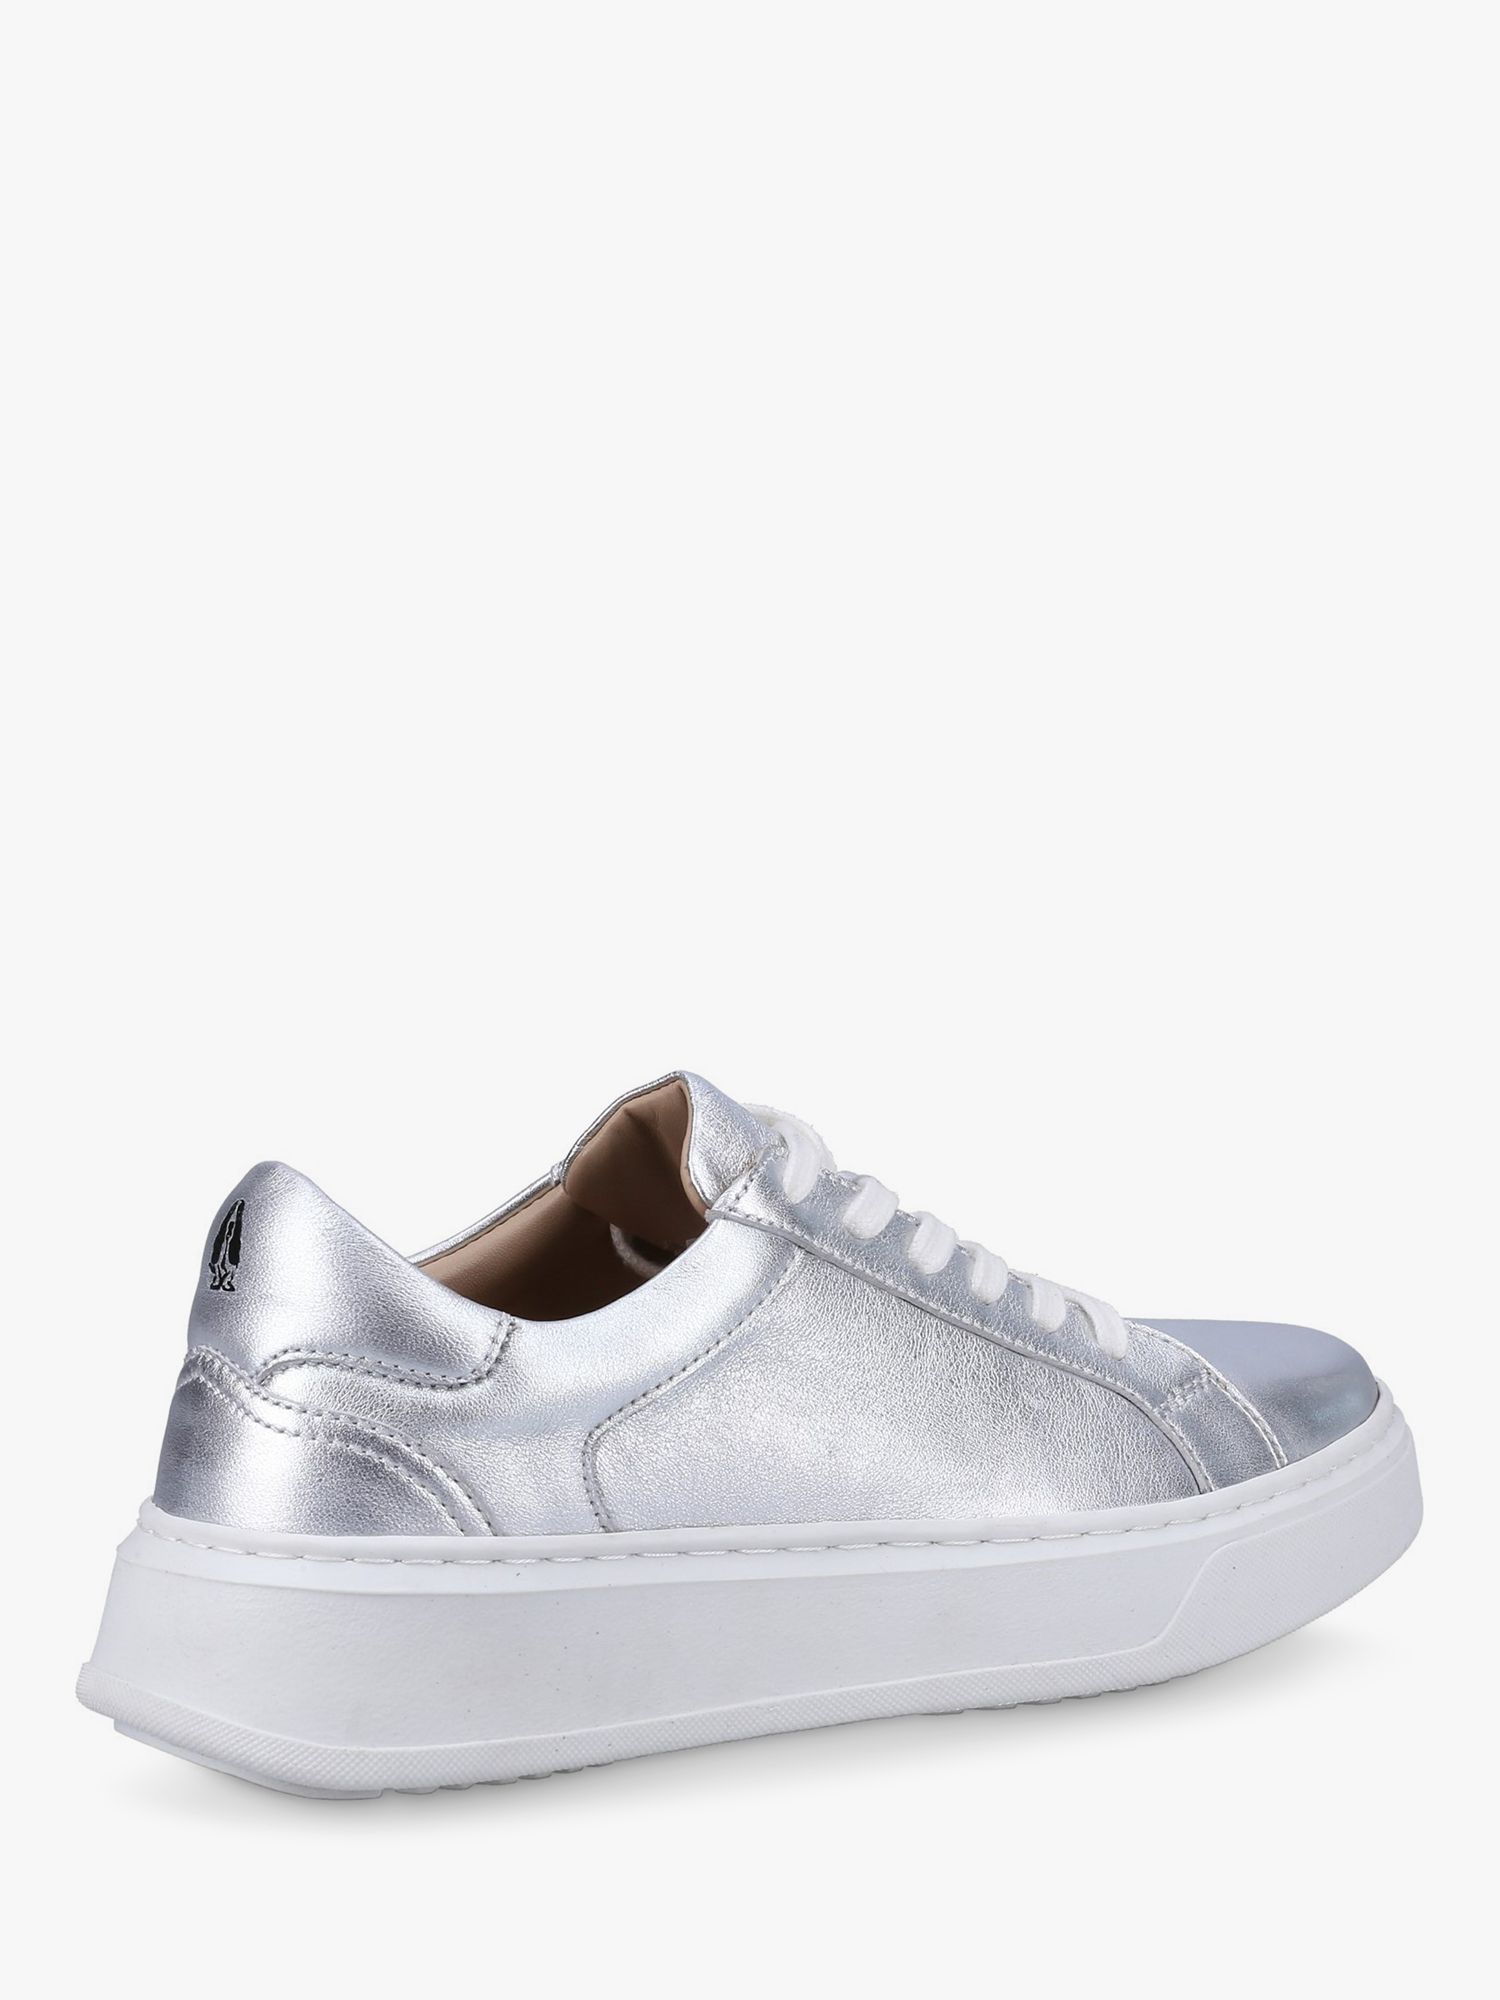 Hush Puppies Camille Lace-Up Leather Trainers, Silver at John Lewis ...